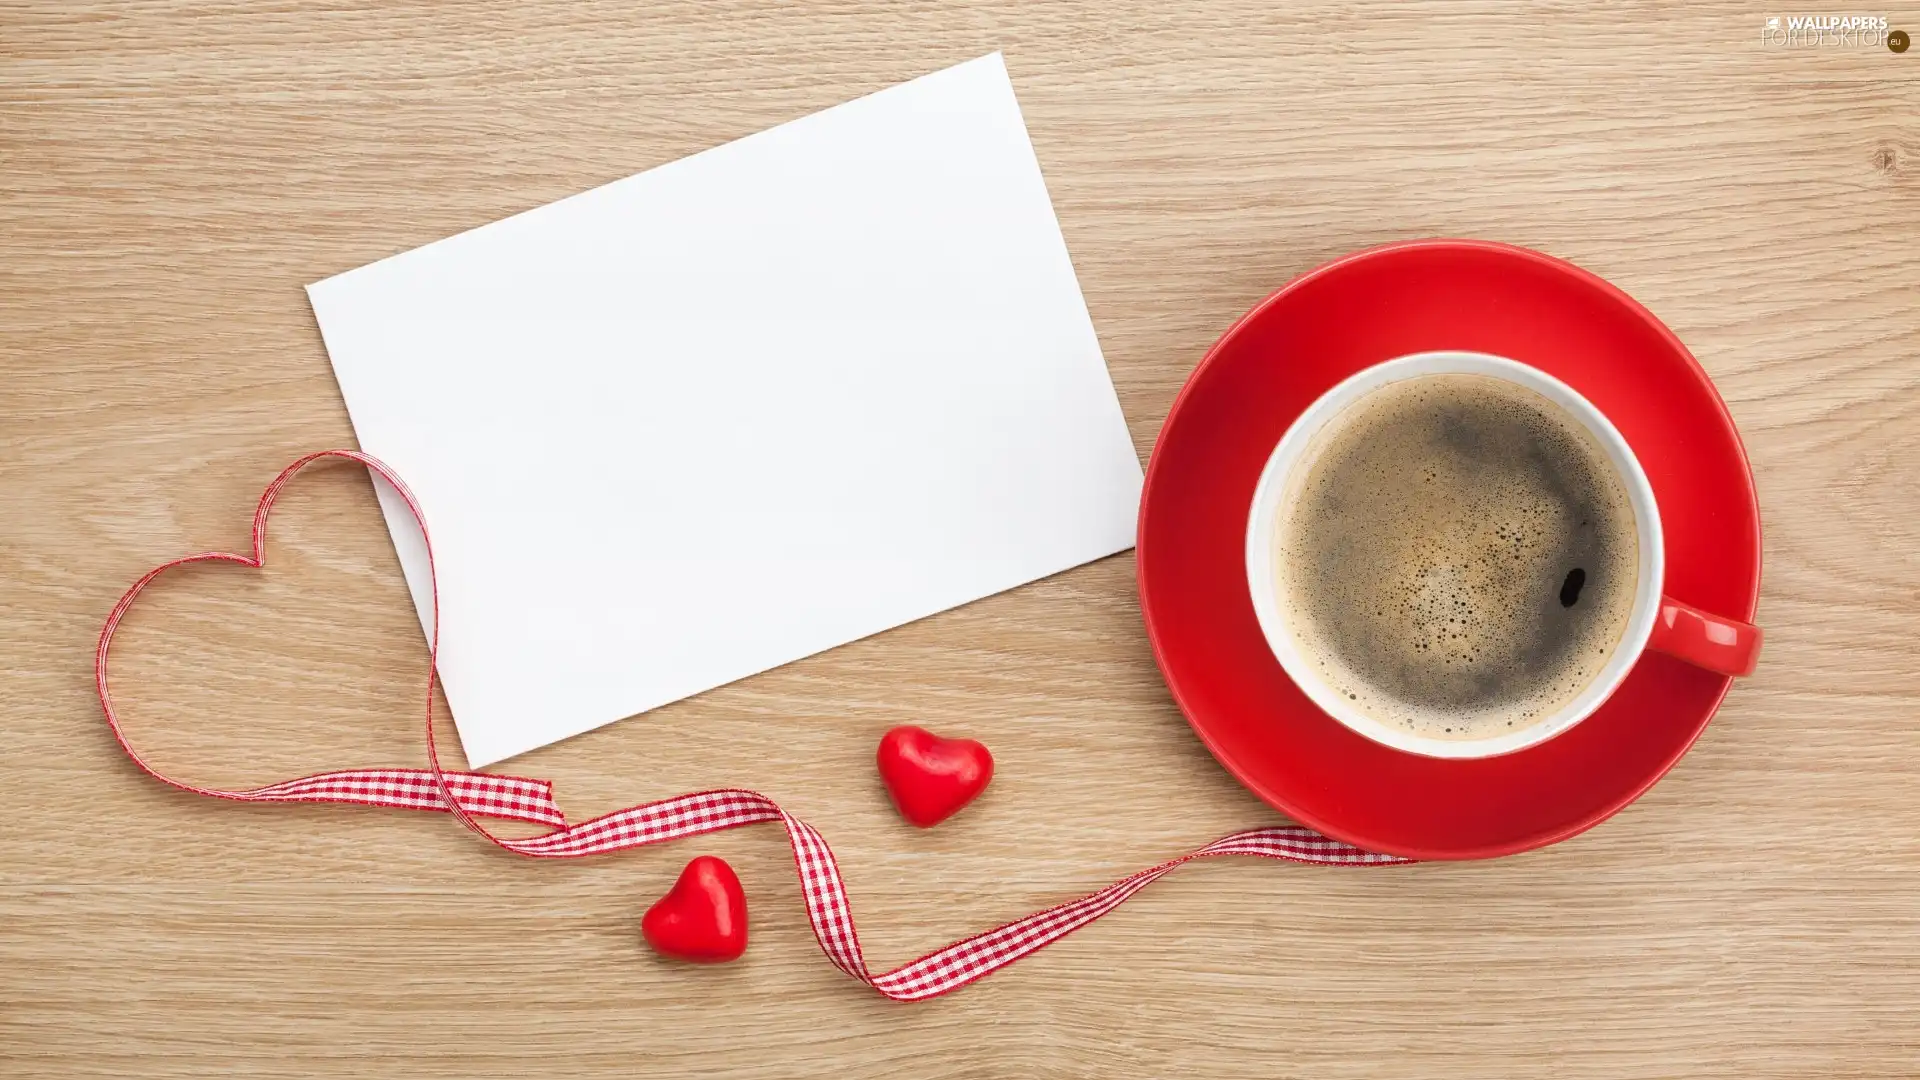 cup, coffee, heart, card, string, red hot